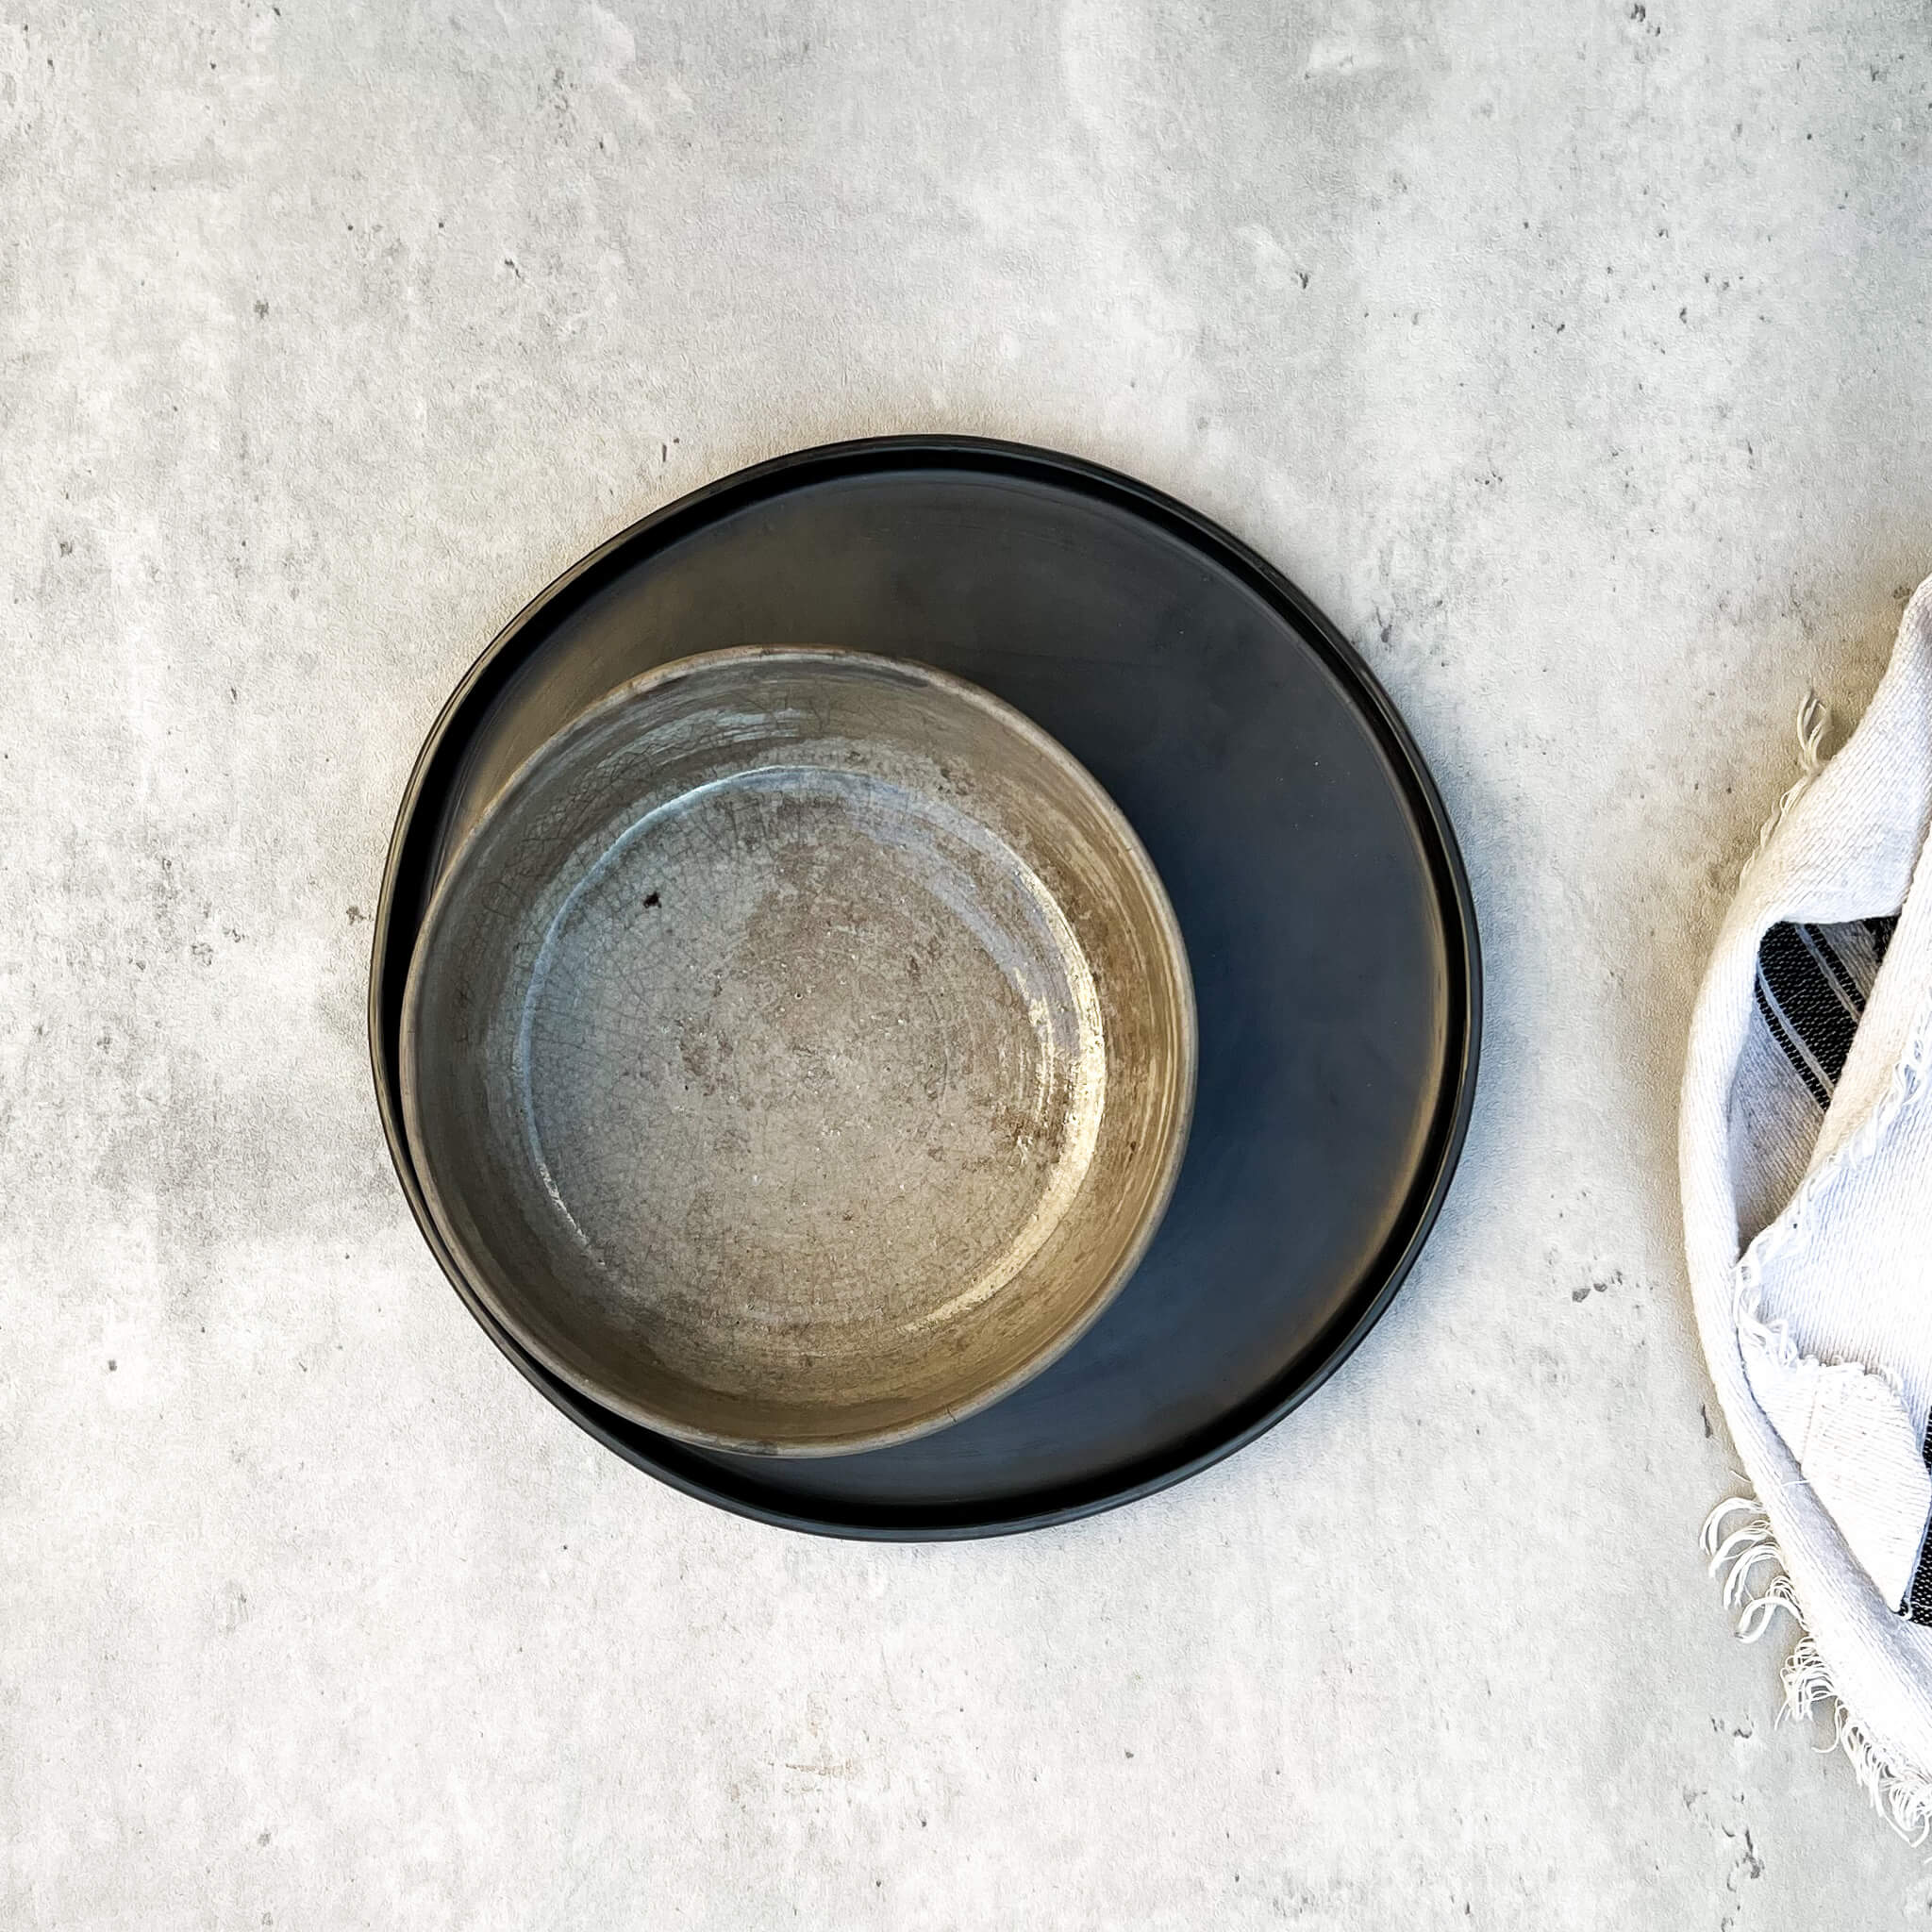 Oaxaca pottery, including a smoked clay bowl paired with a black clay salad plate.